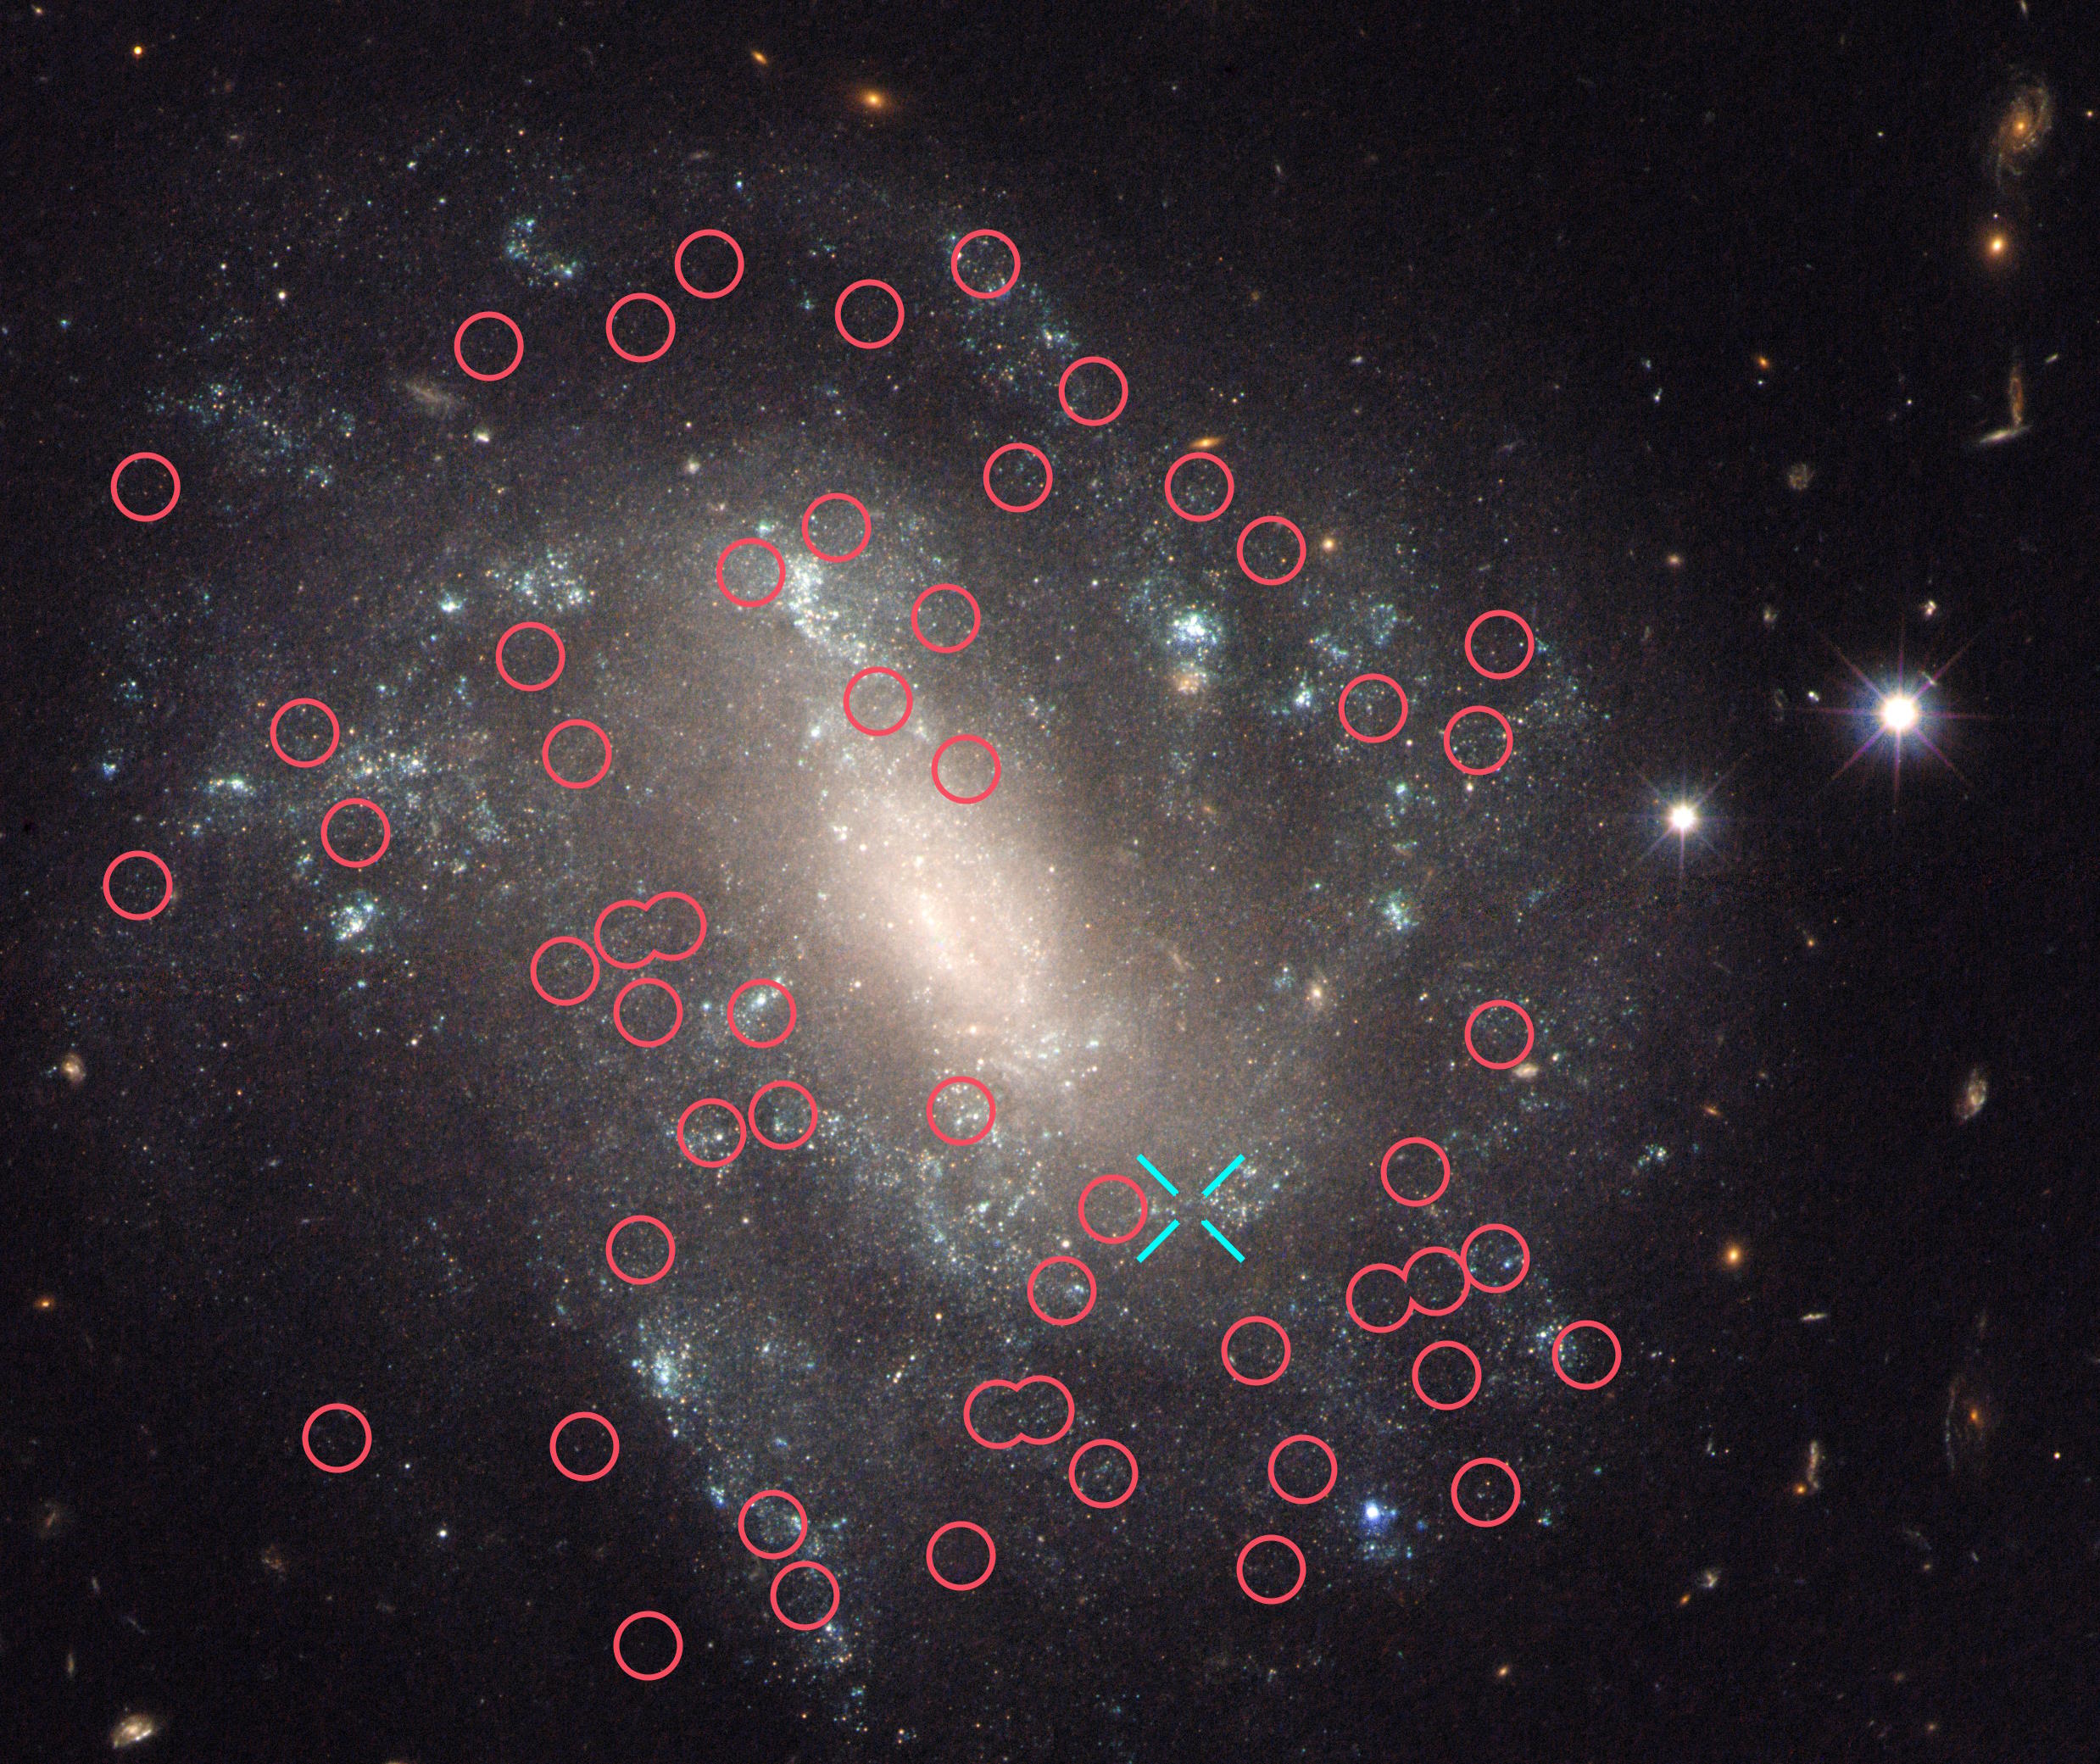 Image of a galaxy with numerous red circles and a cyan cross marked over various points, indicating new measurements or specific features within the galaxy, contributing to the ongoing study of Hubble tension.